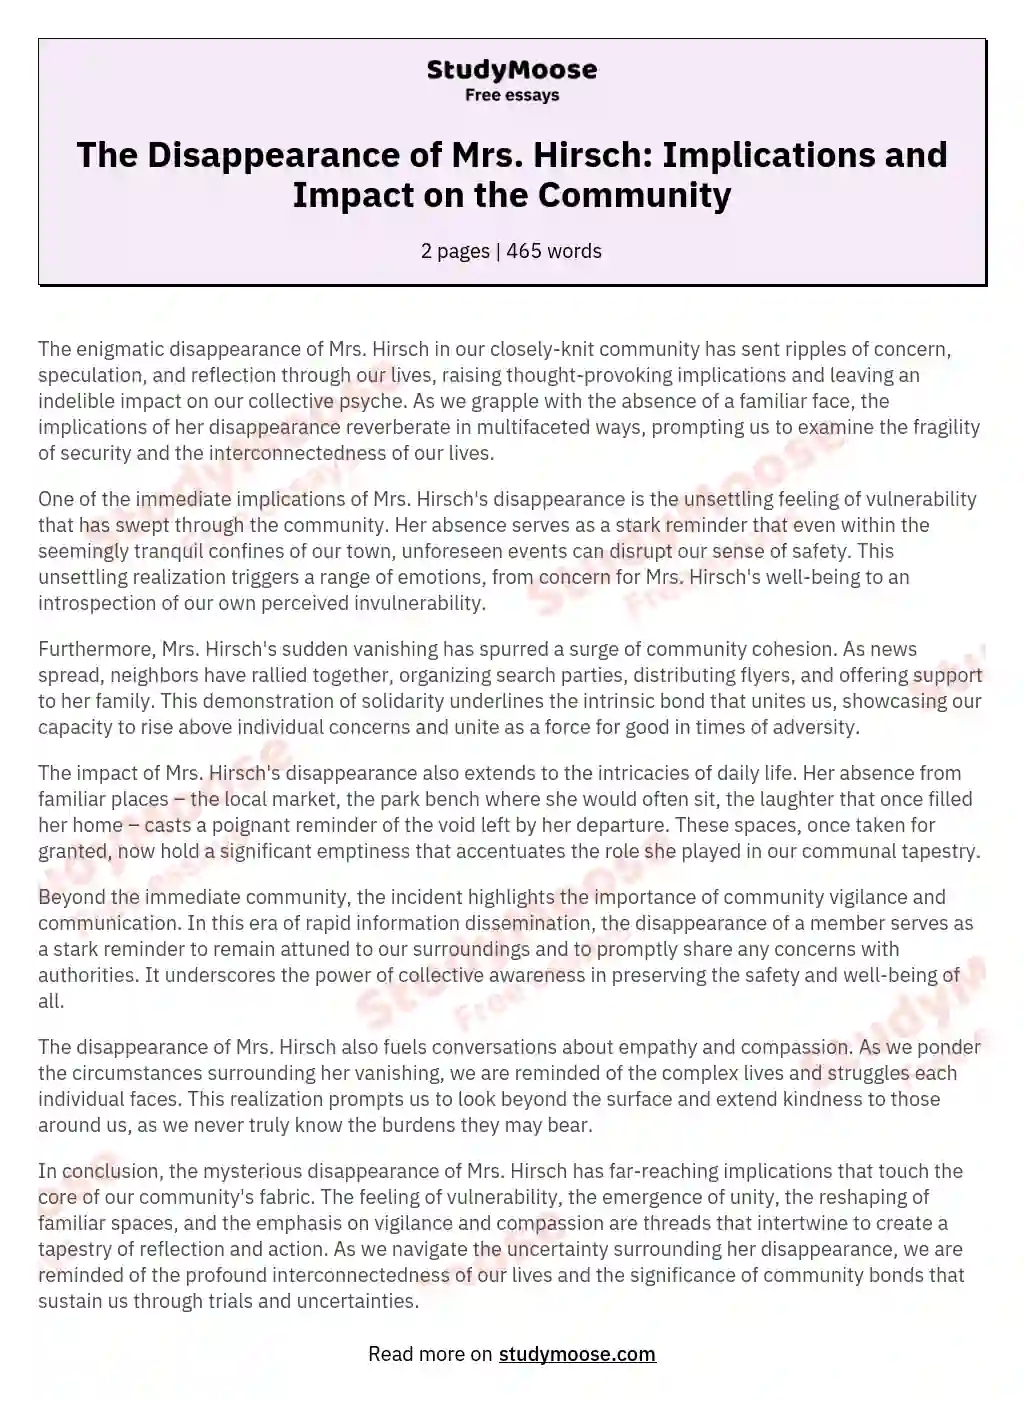 The Disappearance of Mrs. Hirsch: Implications and Impact on the Community essay